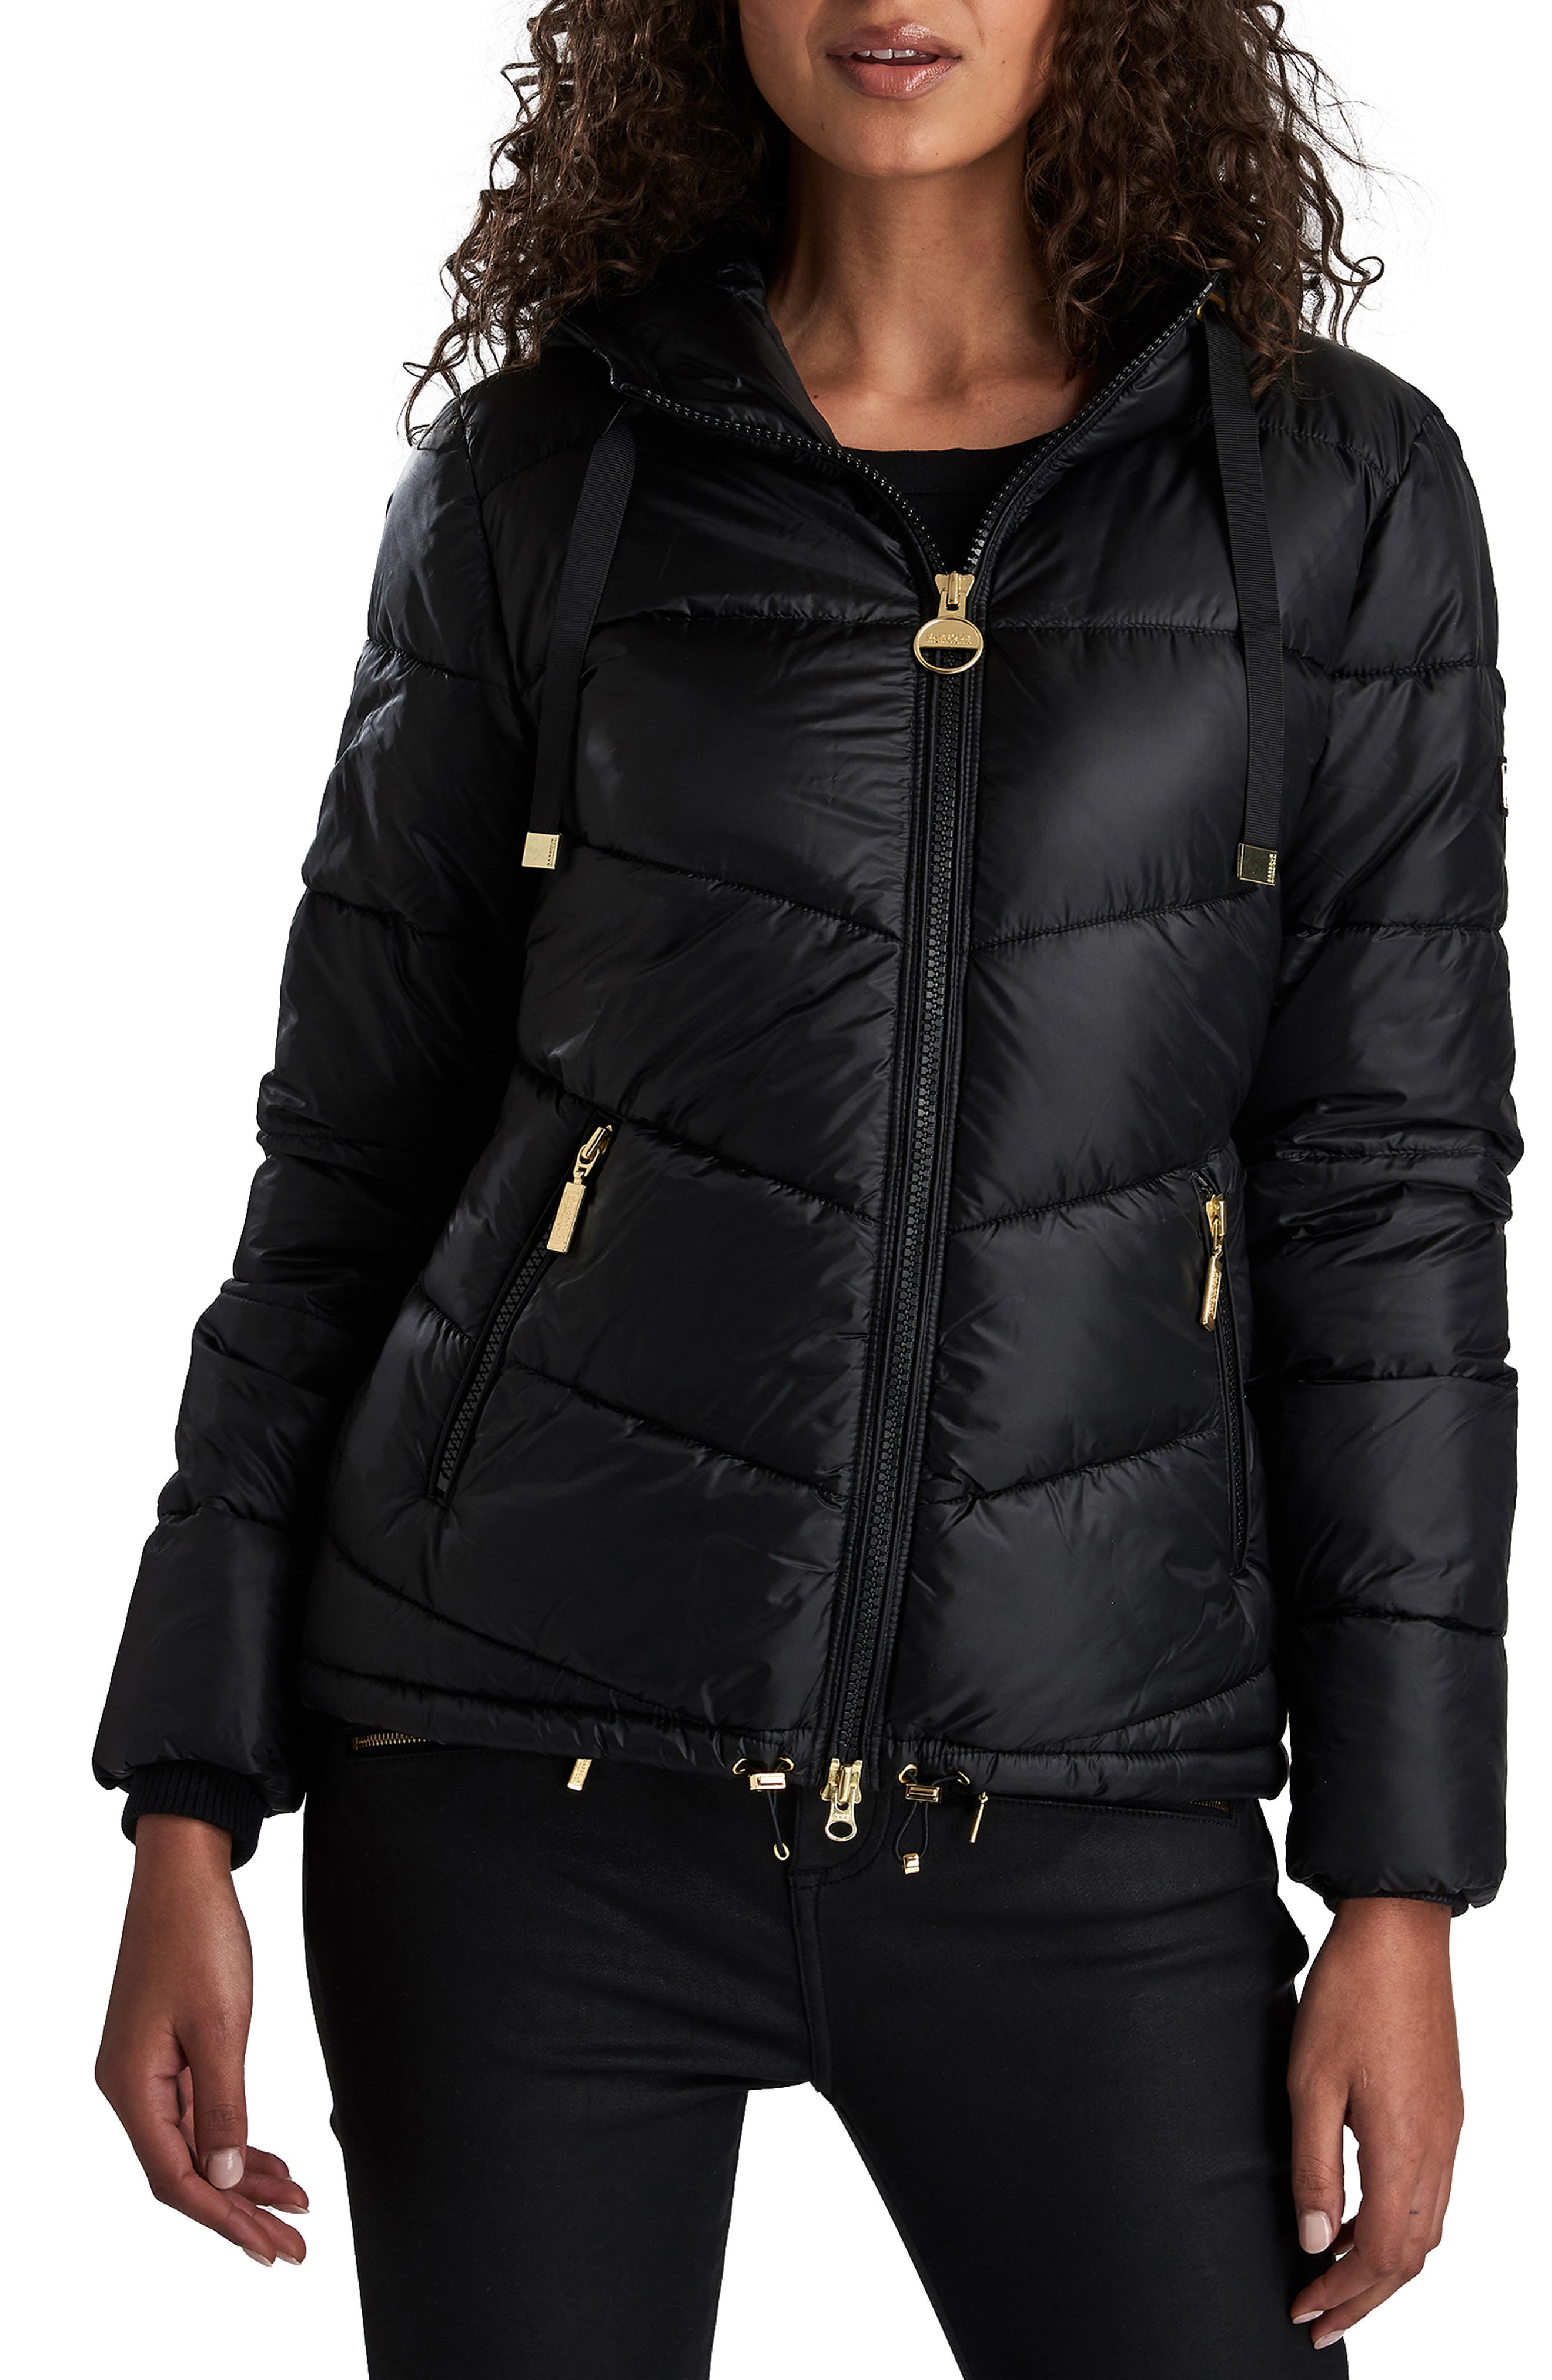 barbour international brace chevron quilted jacket with hood